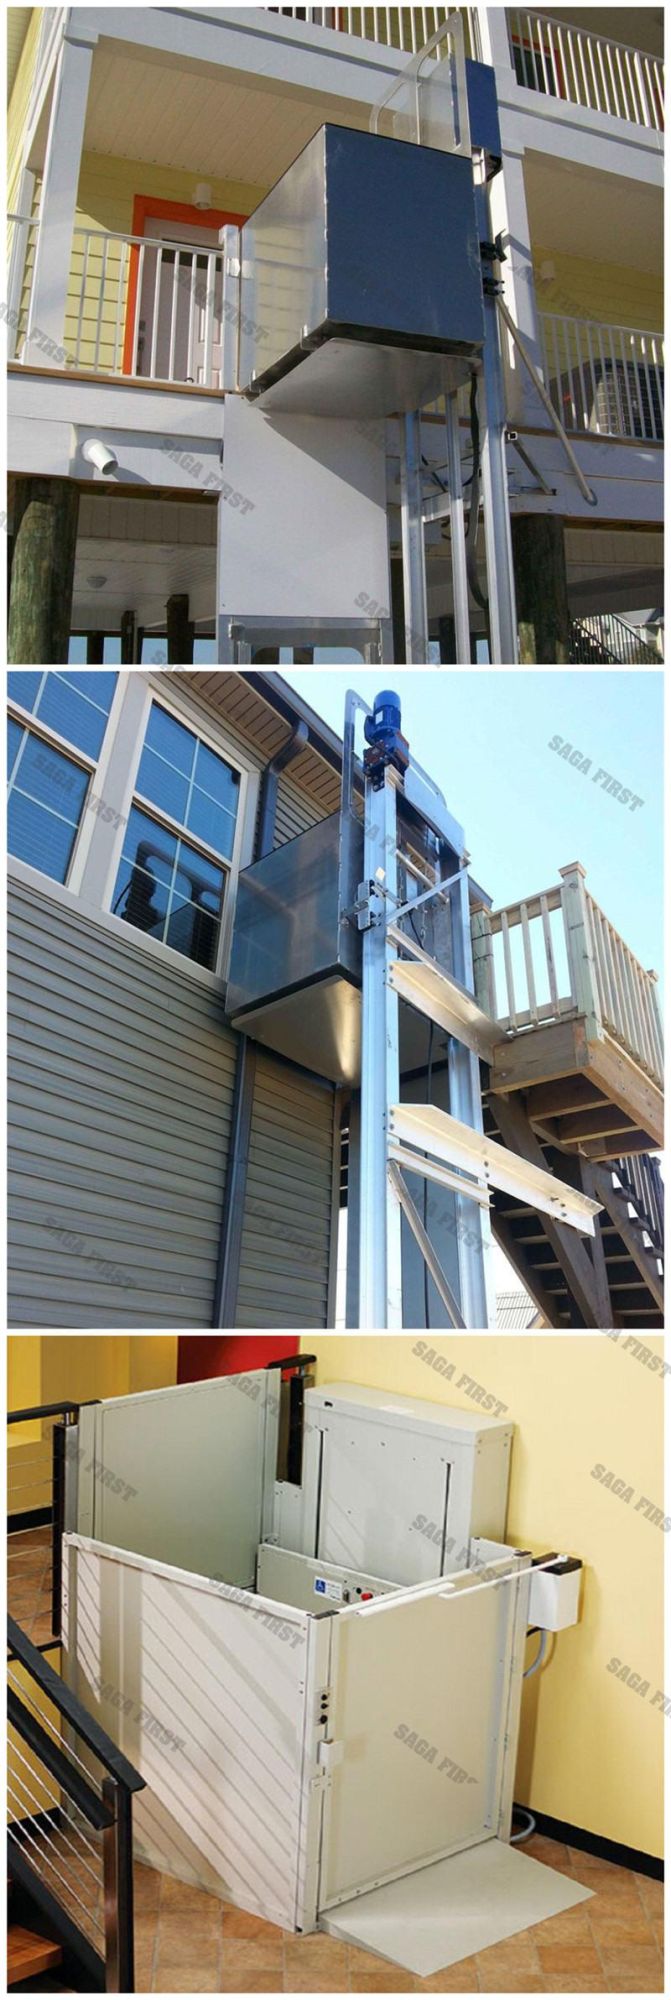 Hydraulic Wheelchair Lift Platform/Vertical Elevator for The Disabled